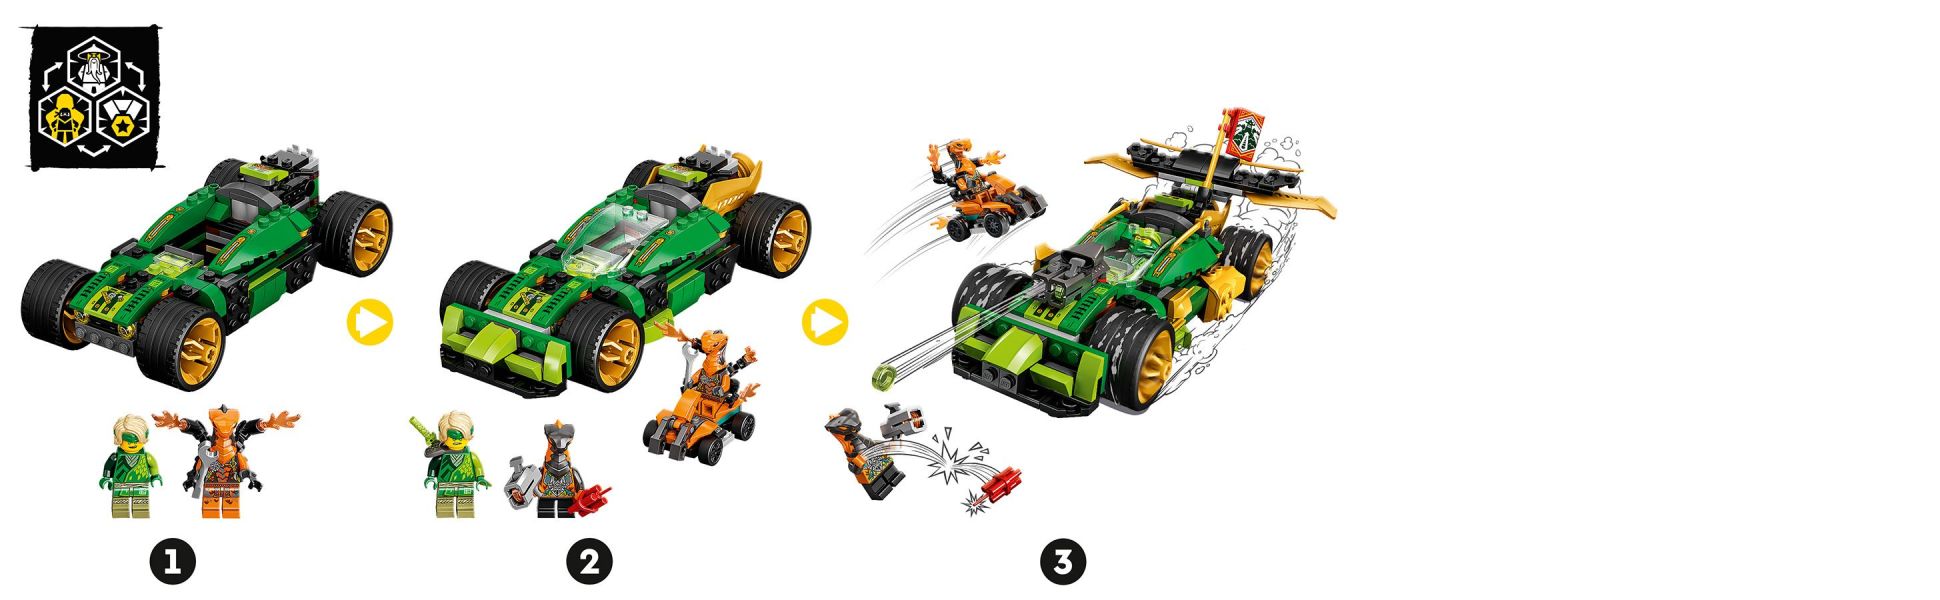 LEGO NINJAGO Lloyd's Race Car EVO 71763 Race Car Toys for Kids 6 Plus Years  Old with Quad Bike, Collectible Set for Build and Play Including Cobra &  Python Snake Figures 